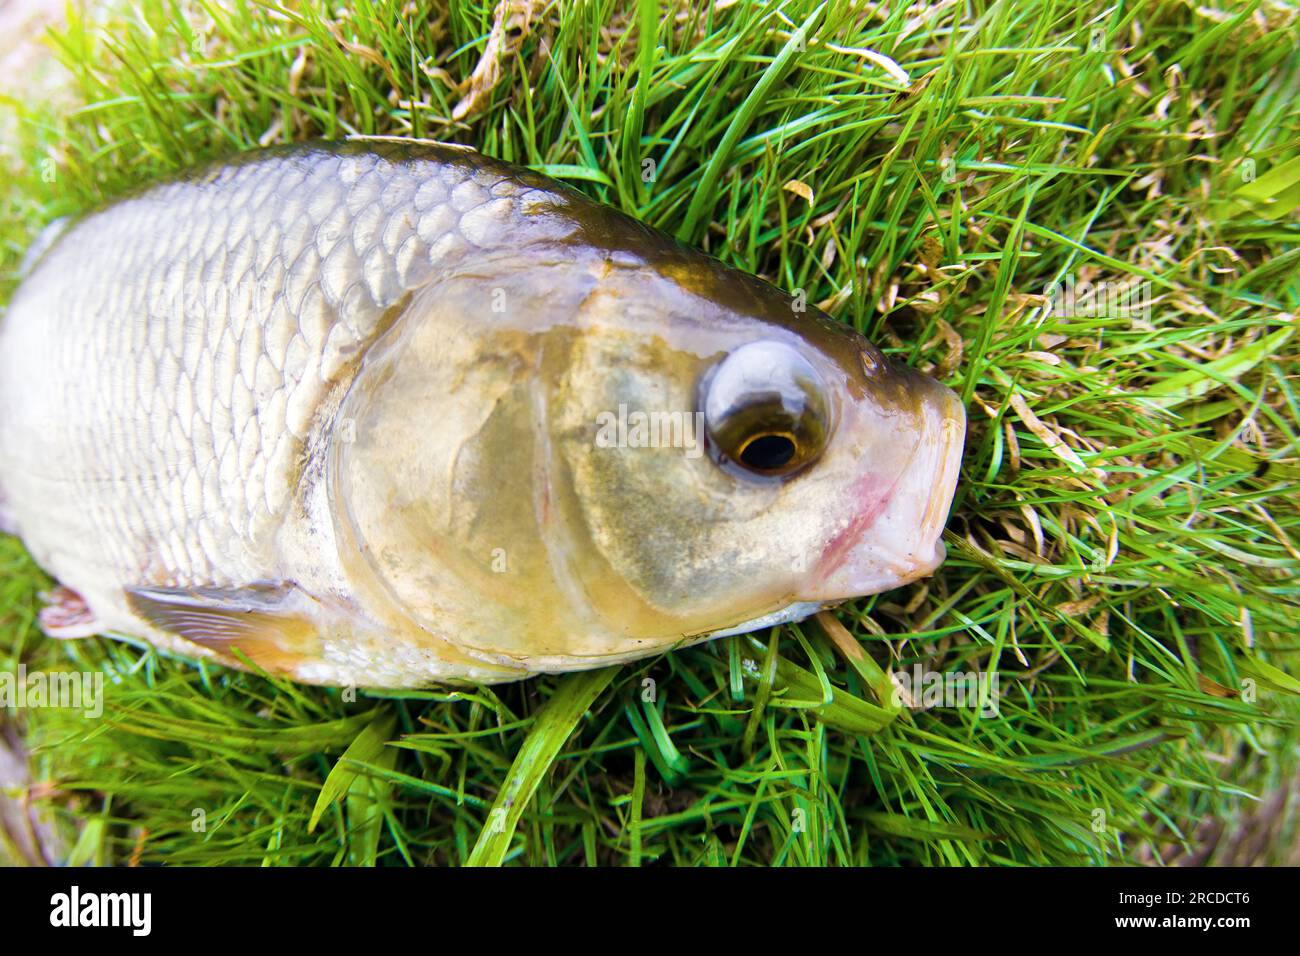 An enviable trophy of a fisherman with a fishing rod in a northern European river. Ide, Nerfling (Leuciscus idus) more then 1,5 kg. The fisheye lens i Stock Photo